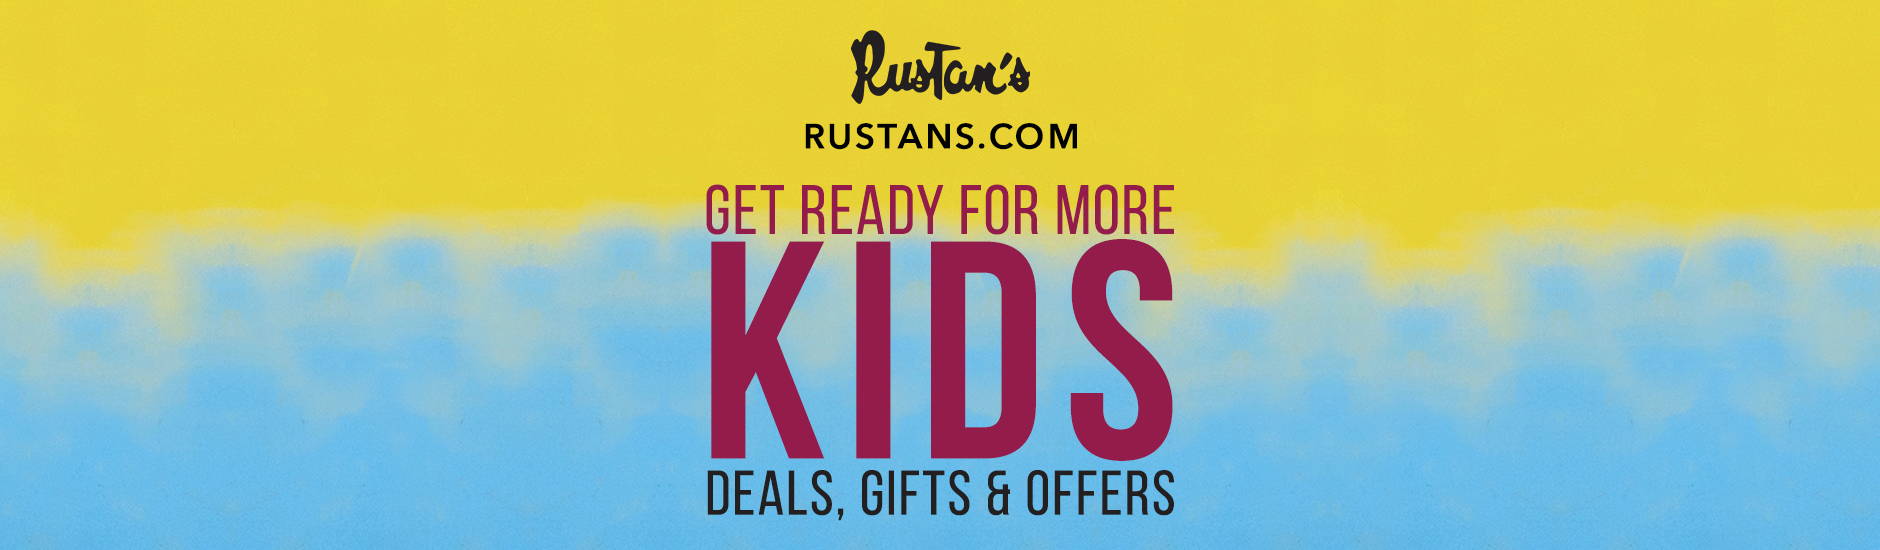 Get Ready for More Deals, Gifts & Offers: Kids